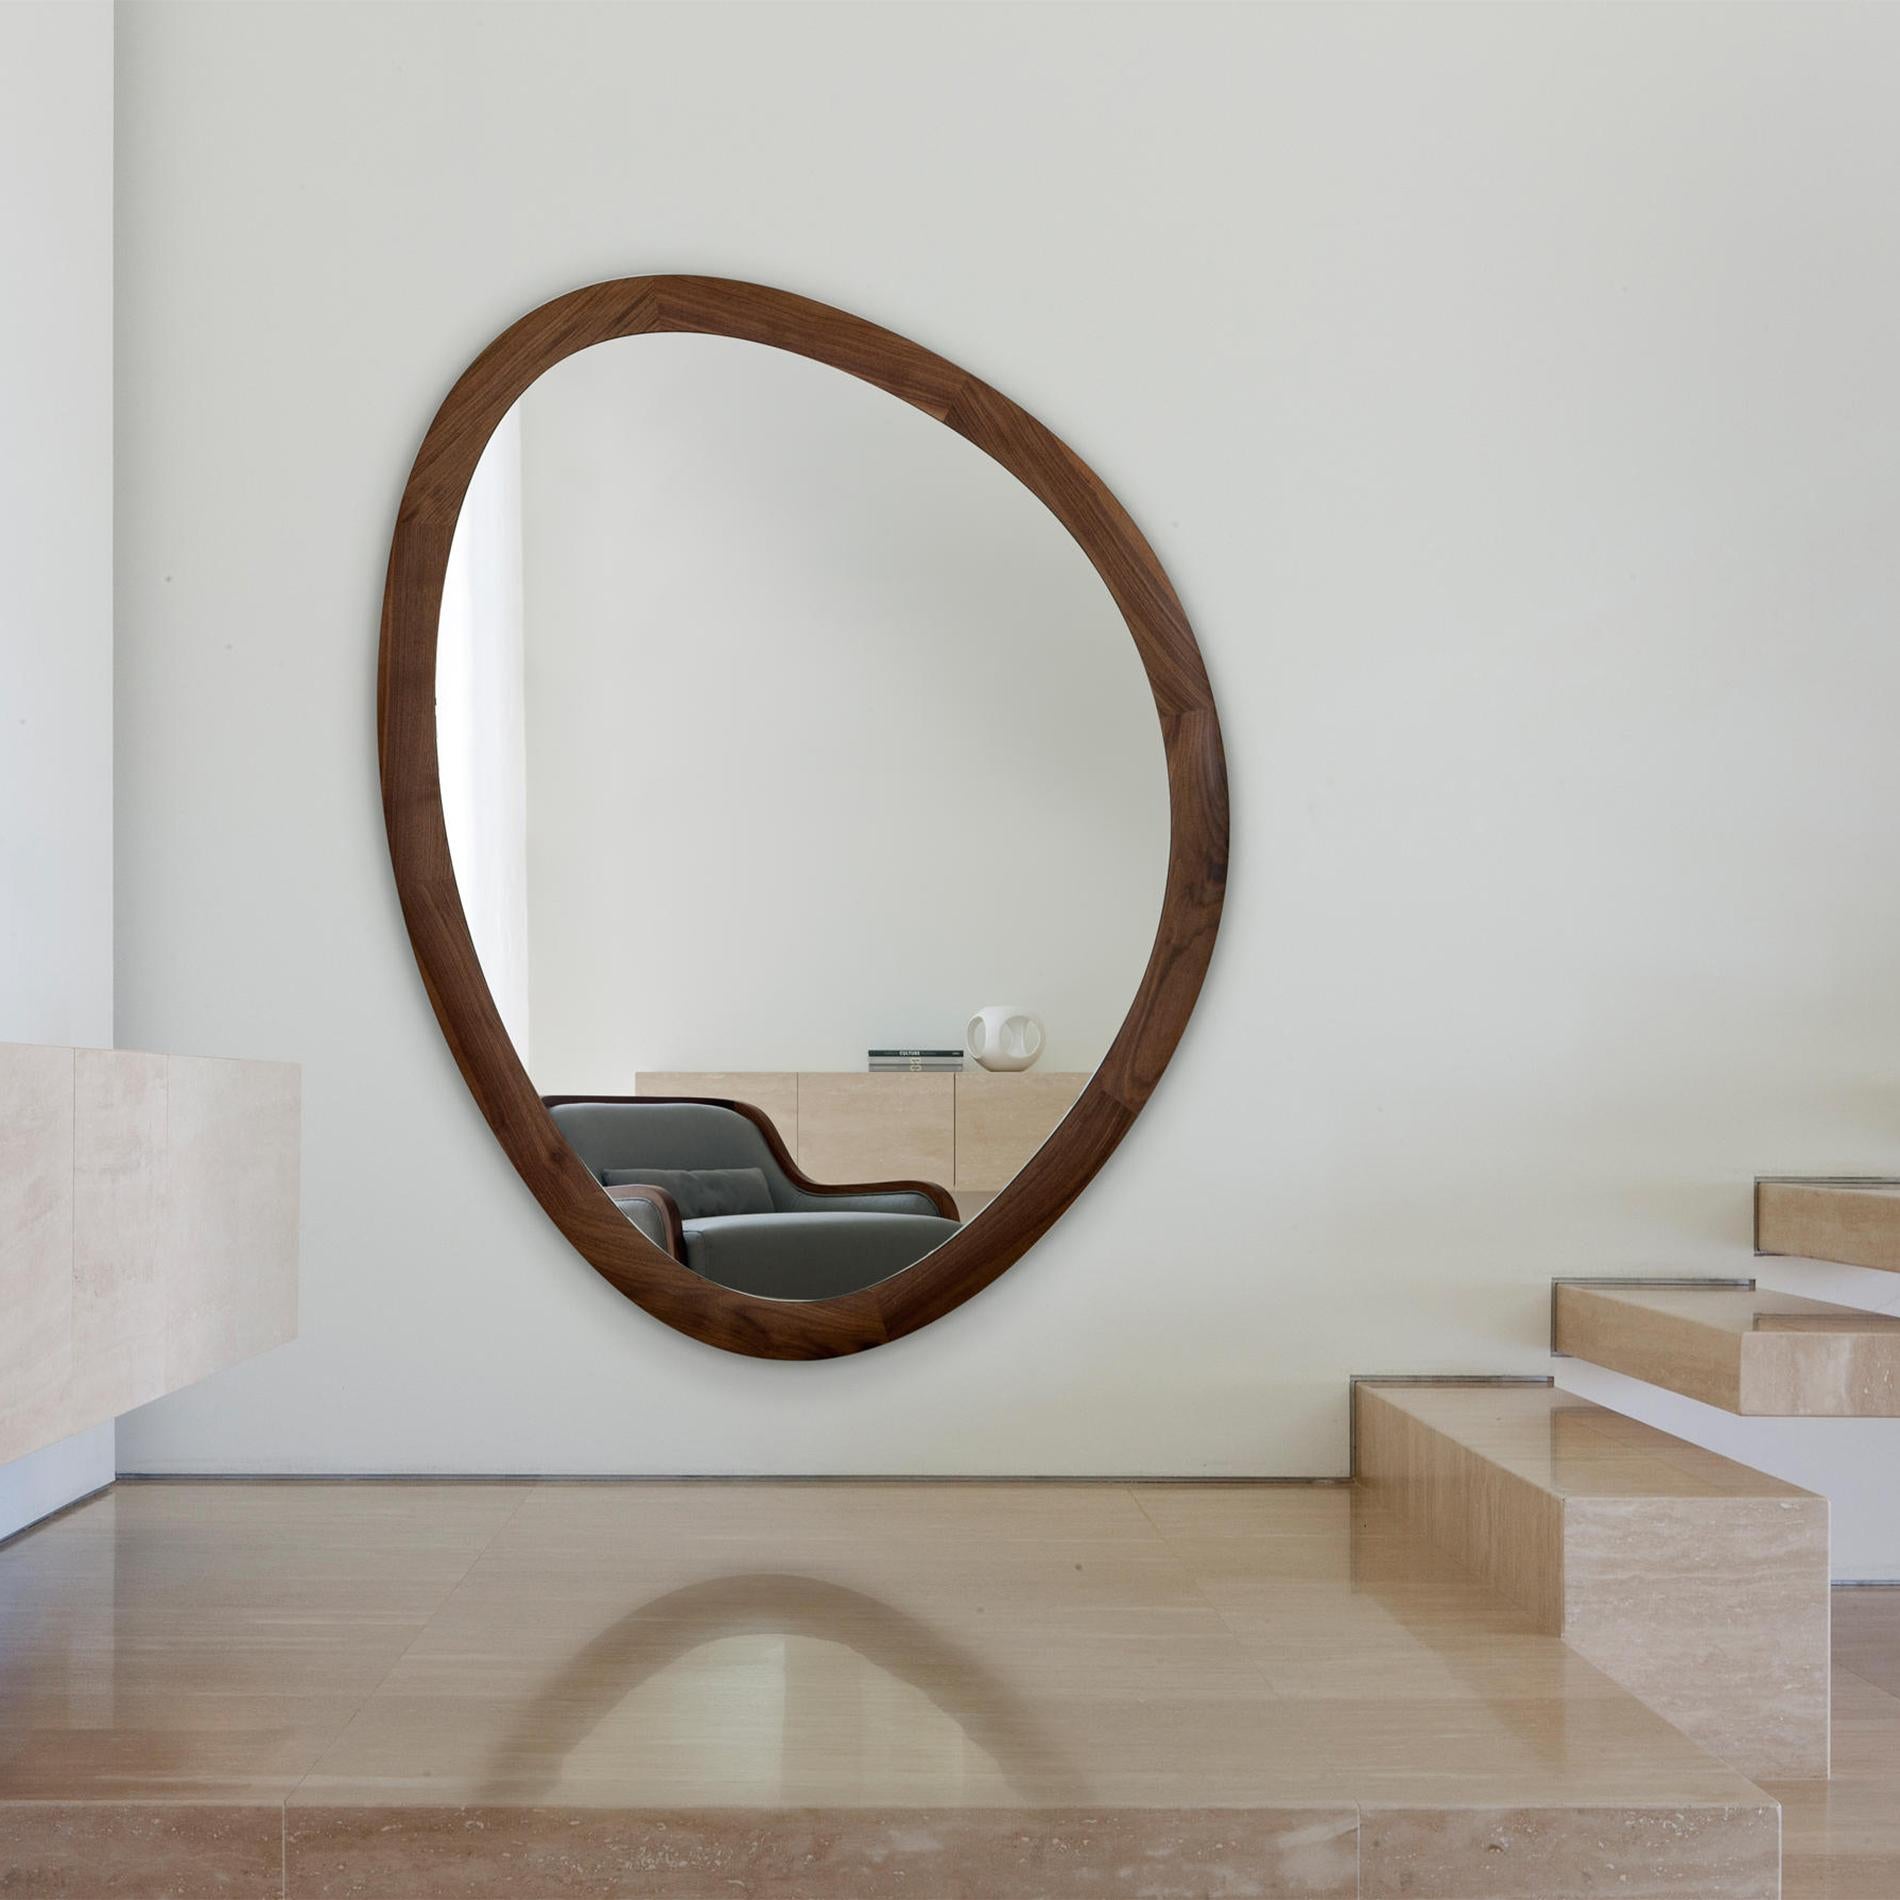 Mirror Mandel with frame in solid walnut wood. 
With clear mirror glass.
Also available on request in:
L76xD03xH100cm, price: 3900,00€.